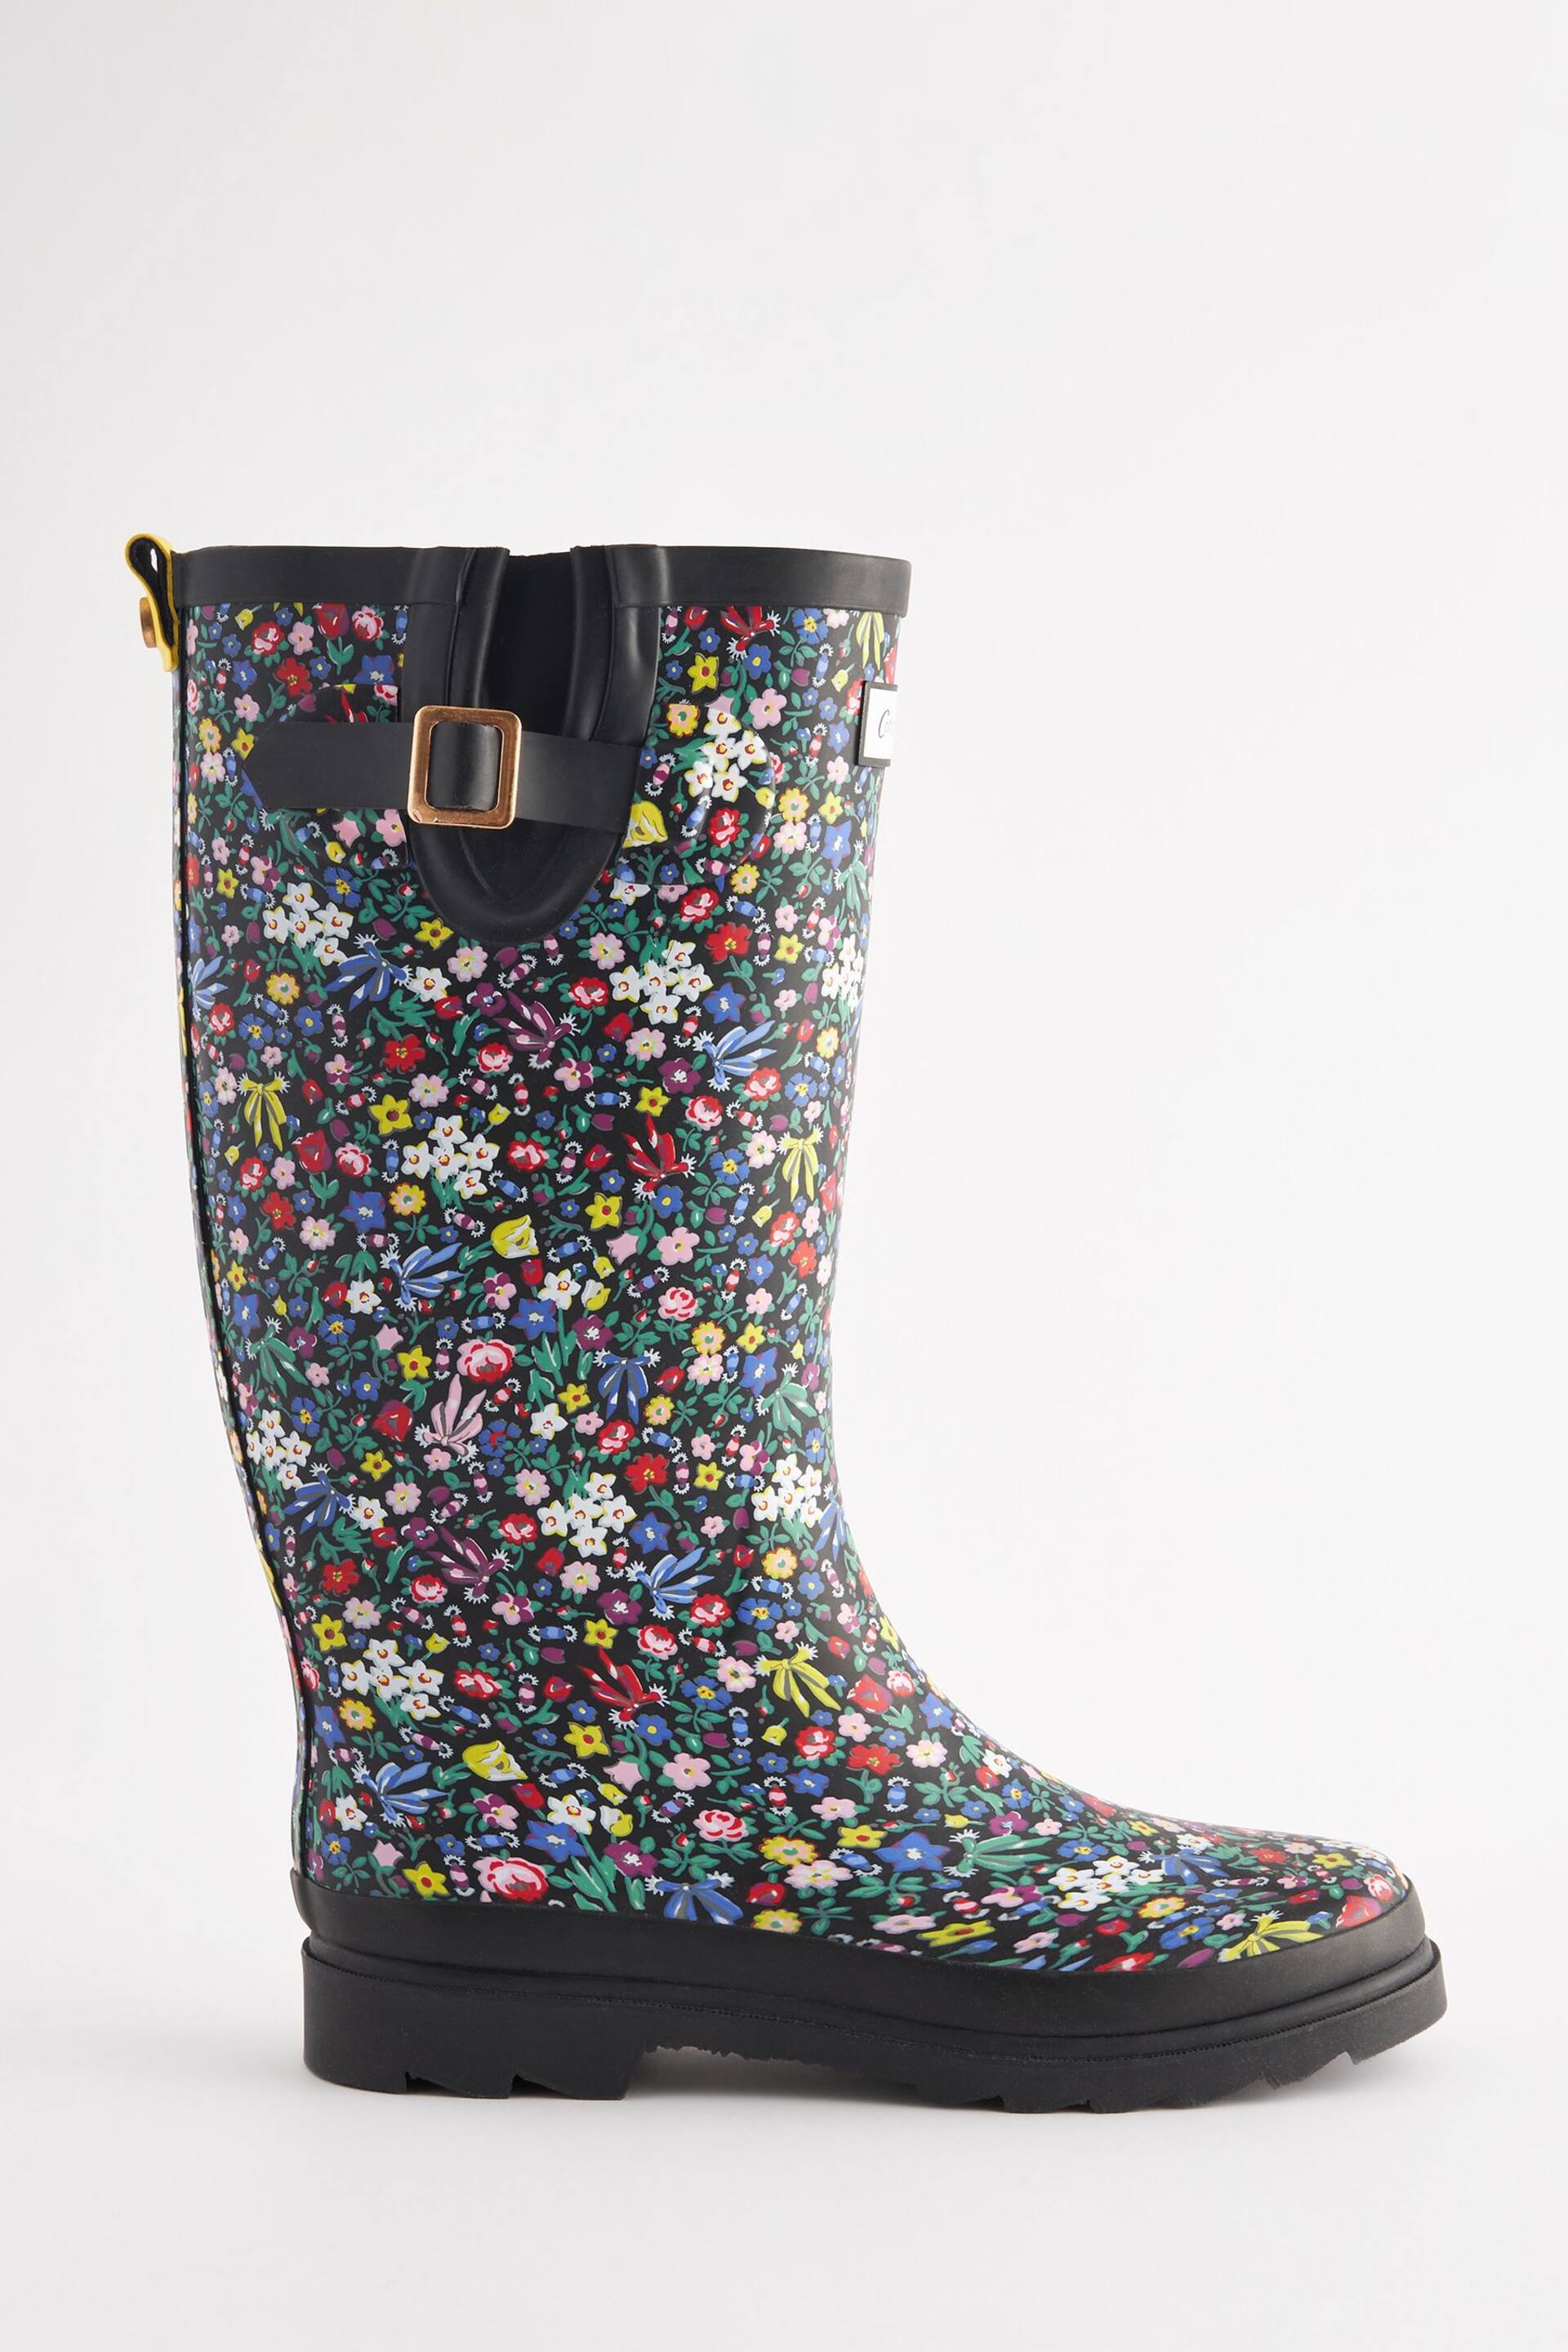 Cath Kidston Black Ditsy Floral Tall Wellies - Image 2 of 7